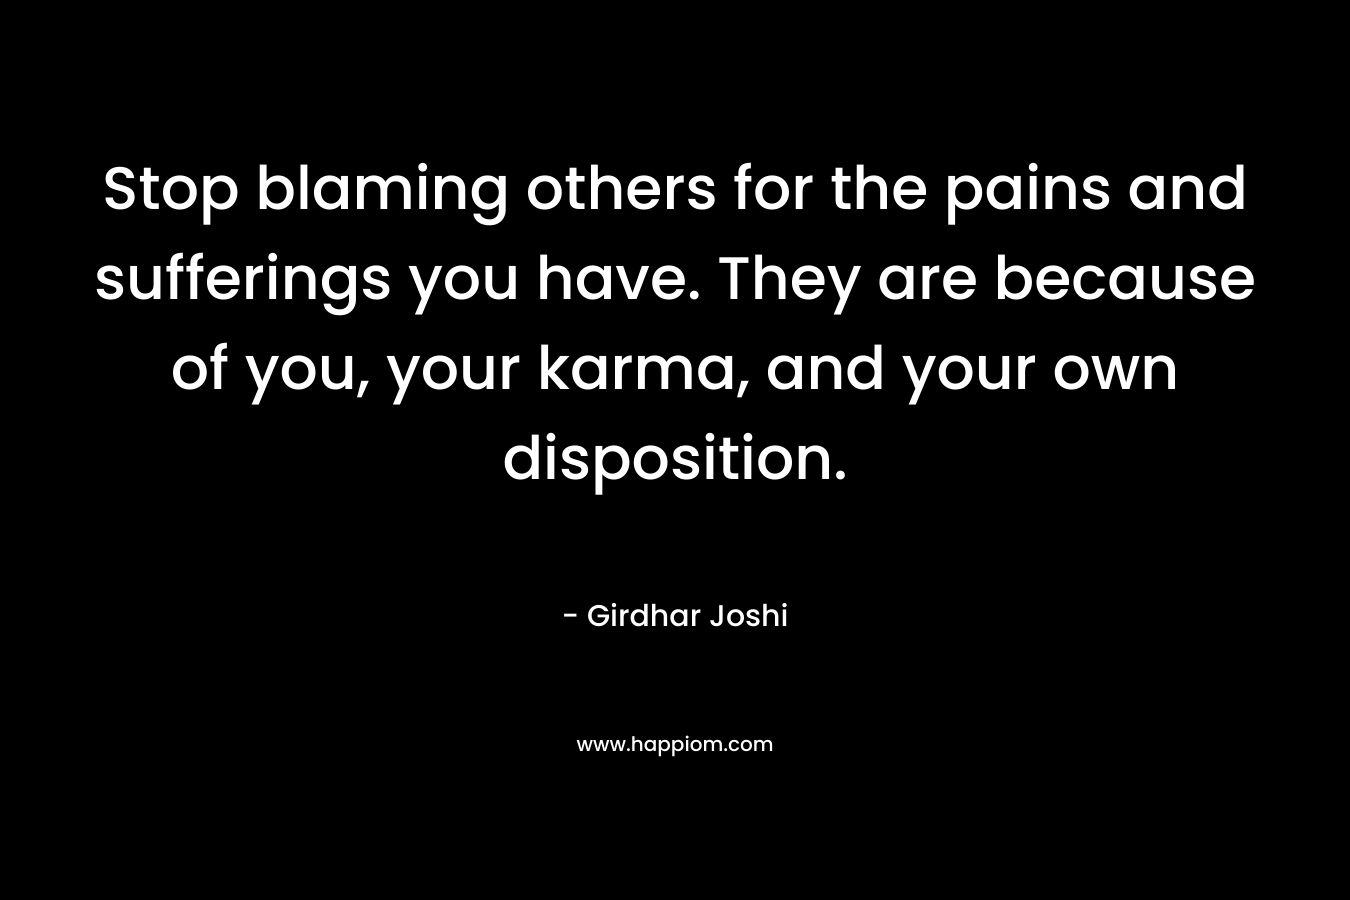 Stop blaming others for the pains and sufferings you have. They are because of you, your karma, and your own disposition.